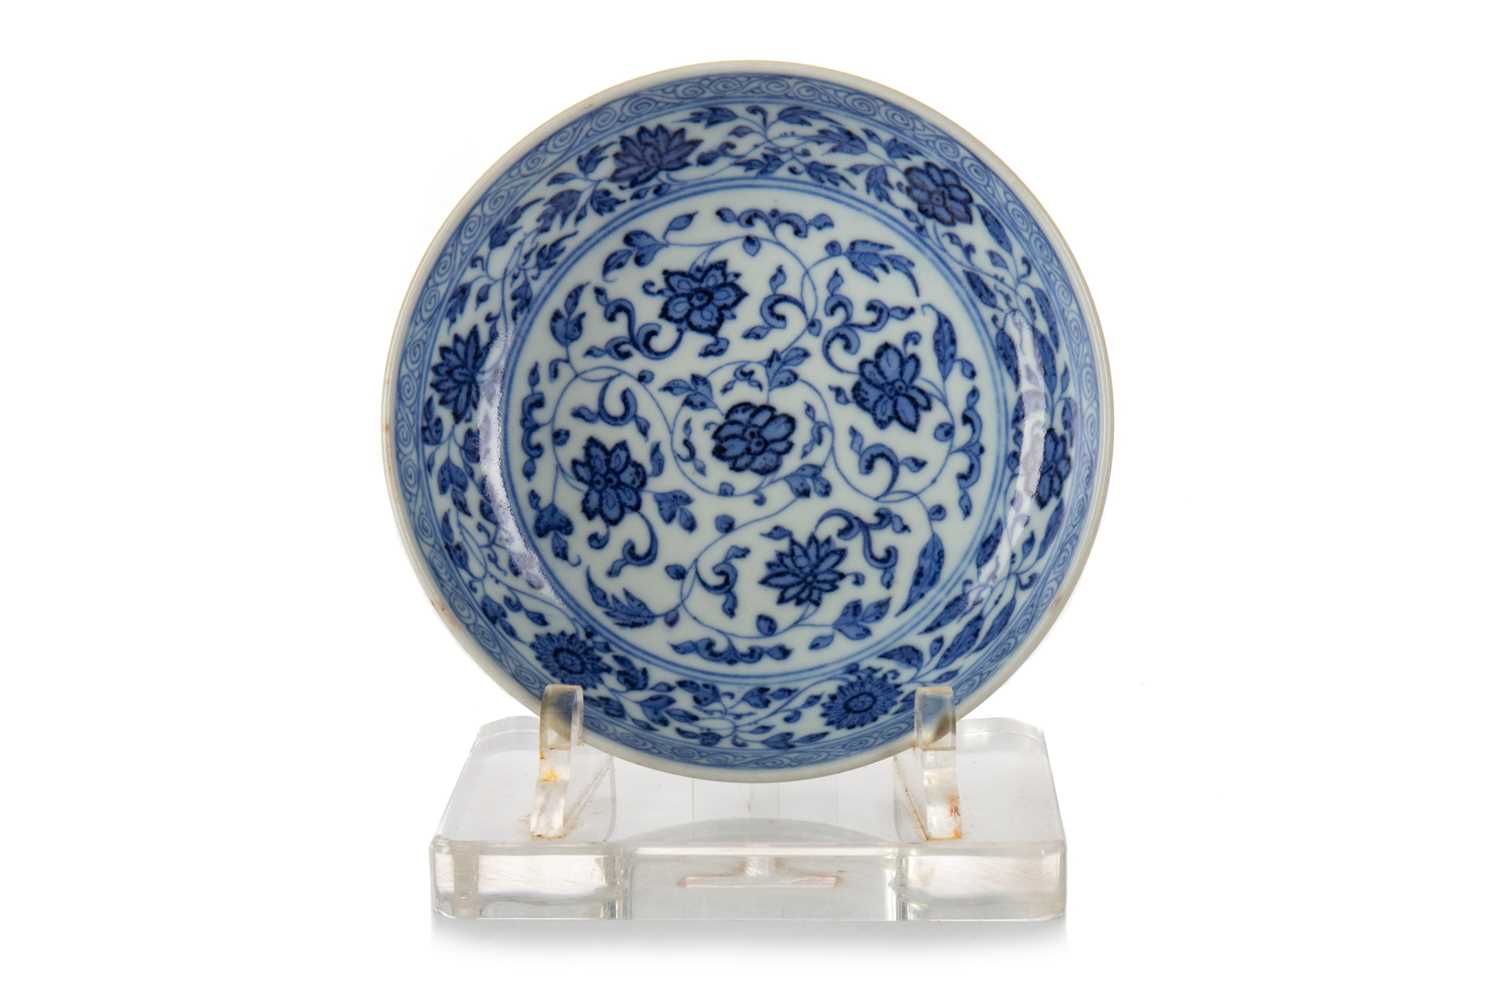 DAOGUANG BLUE AND WHITE DISH, MID-LATE 19TH CENTURY